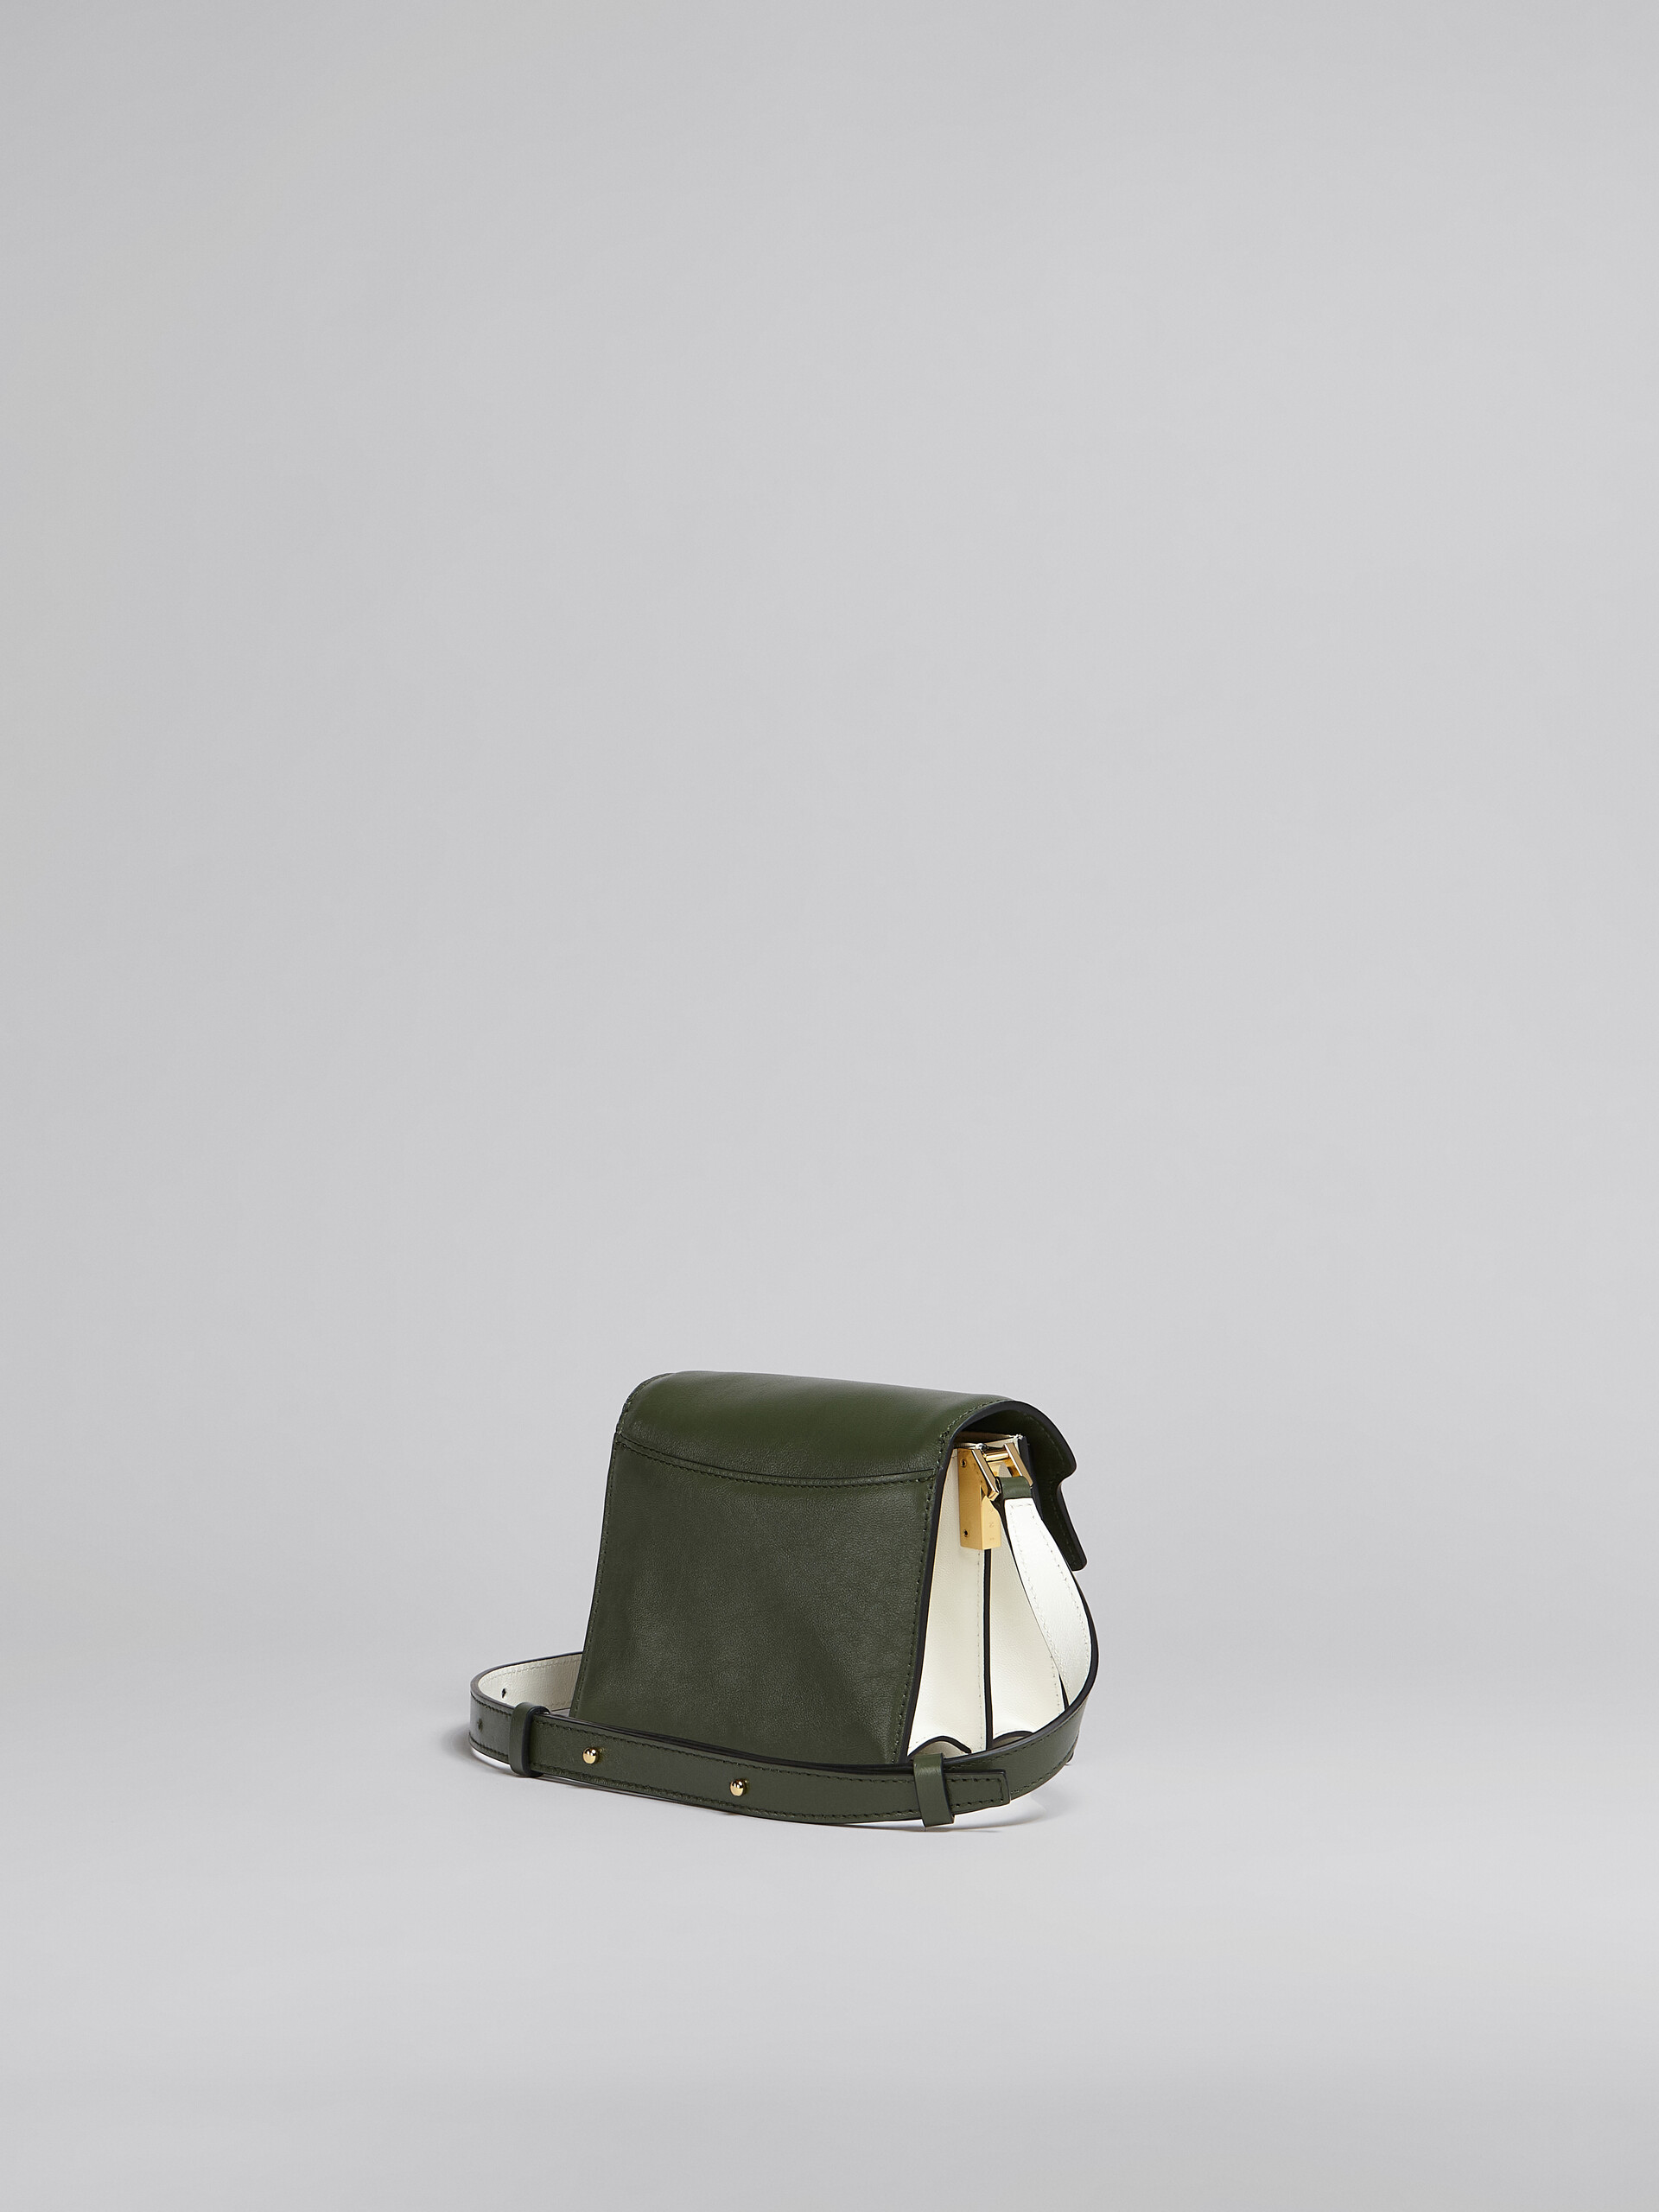 Trunk Soft Mini Bag in green and white leather - Shoulder Bag - Image 3